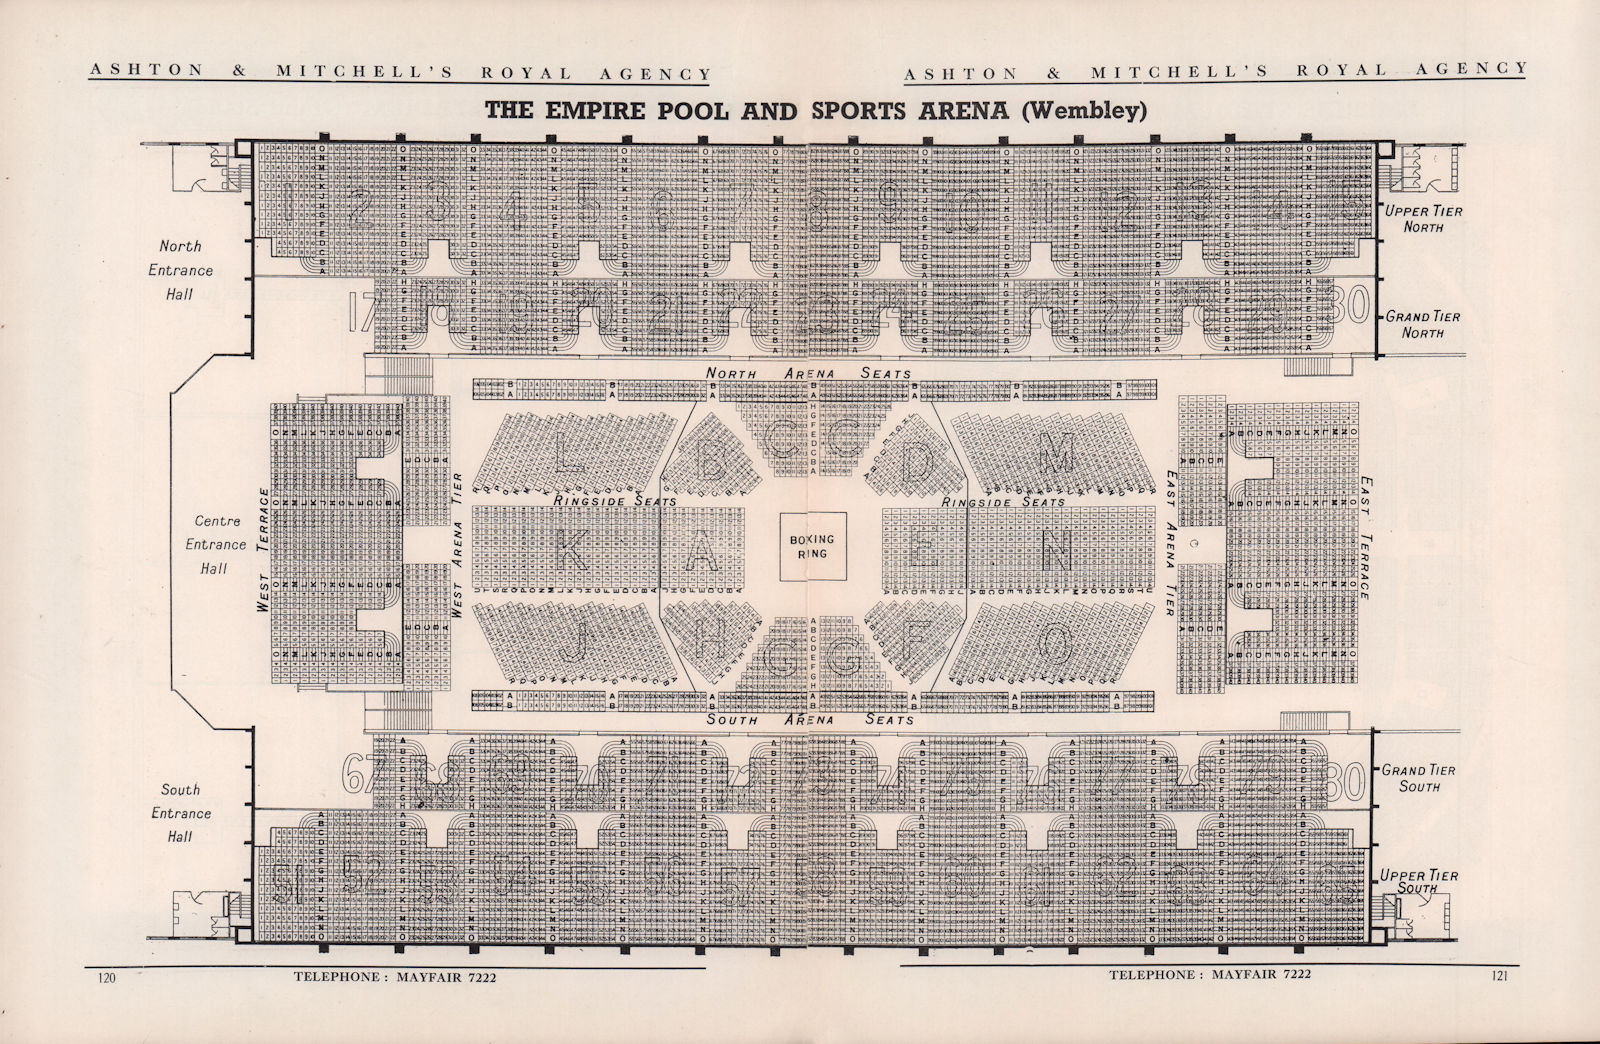 EMPIRE POOL & SPORTS ARENA vintage seating plan. Now WEMBLEY ARENA. London 1937